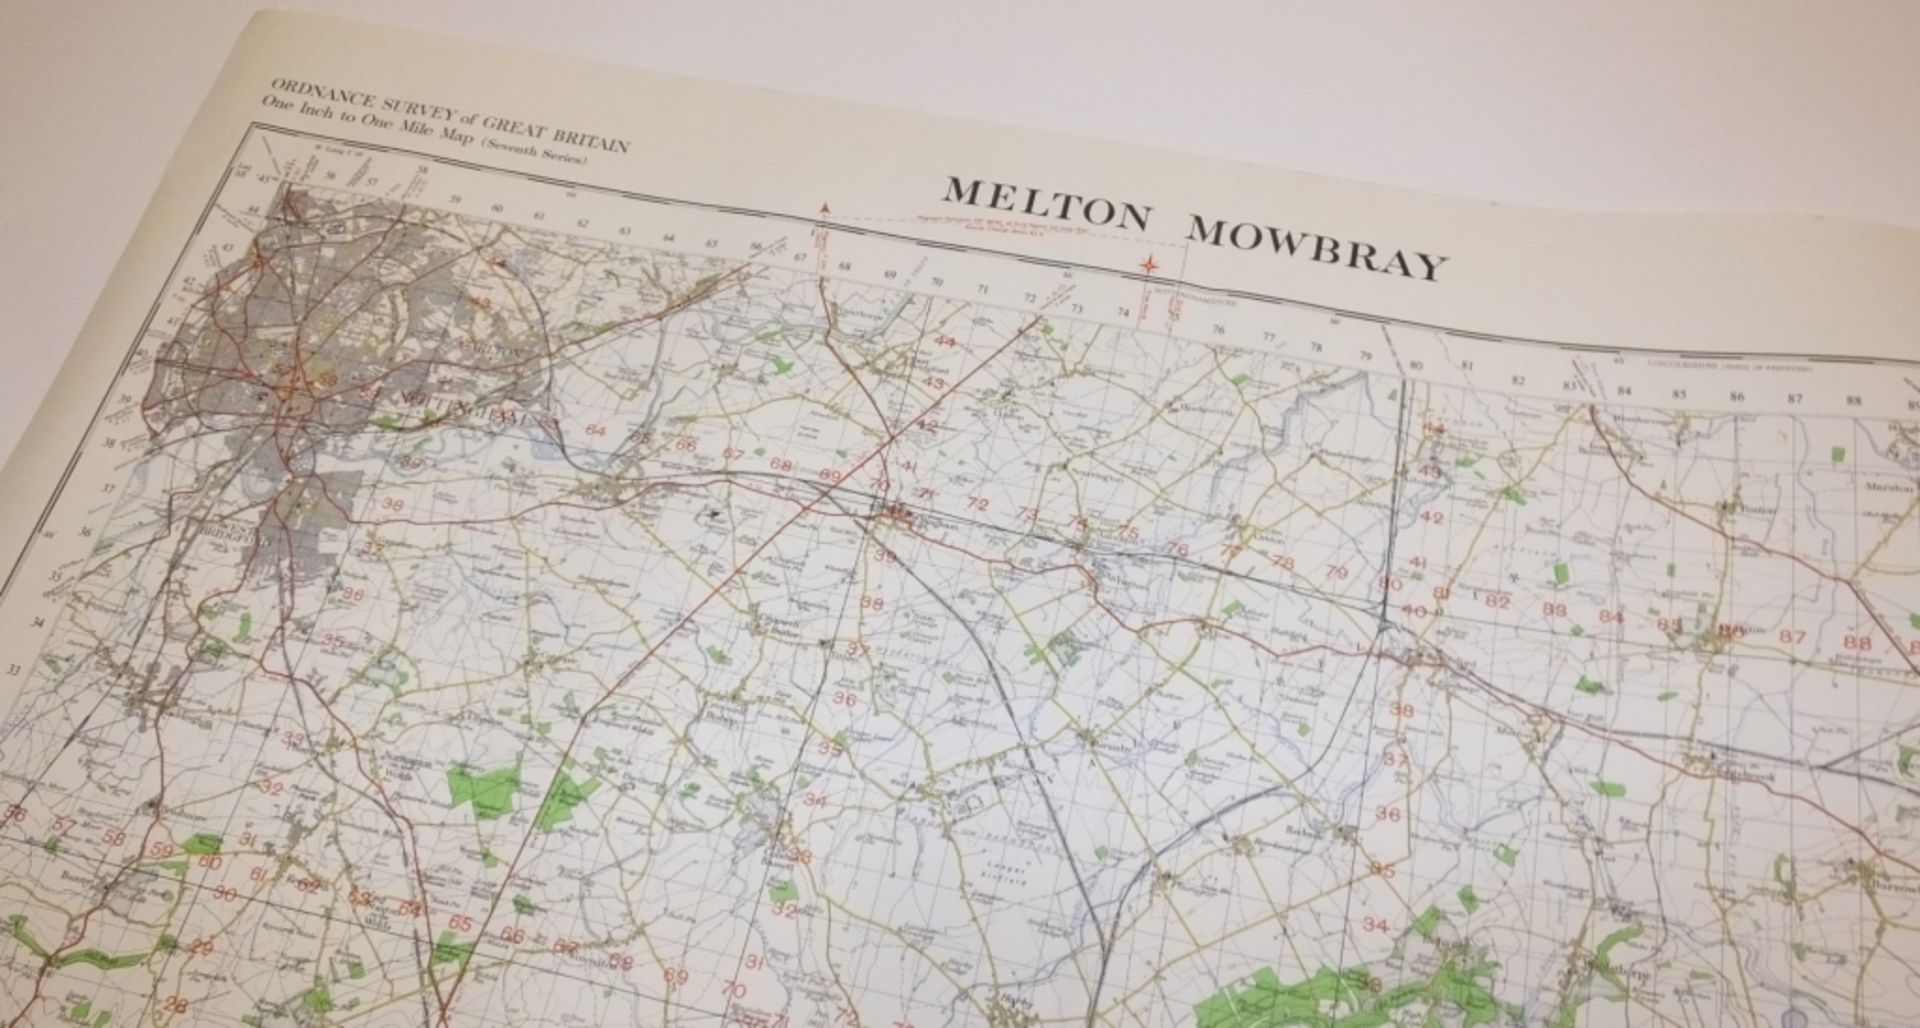 26x ENGLAND & WALES MAP MELTON MOWBRAY 1INCH 1MILE 1961 7TH SERIES 3GSGS SHEET 122 - Image 2 of 4